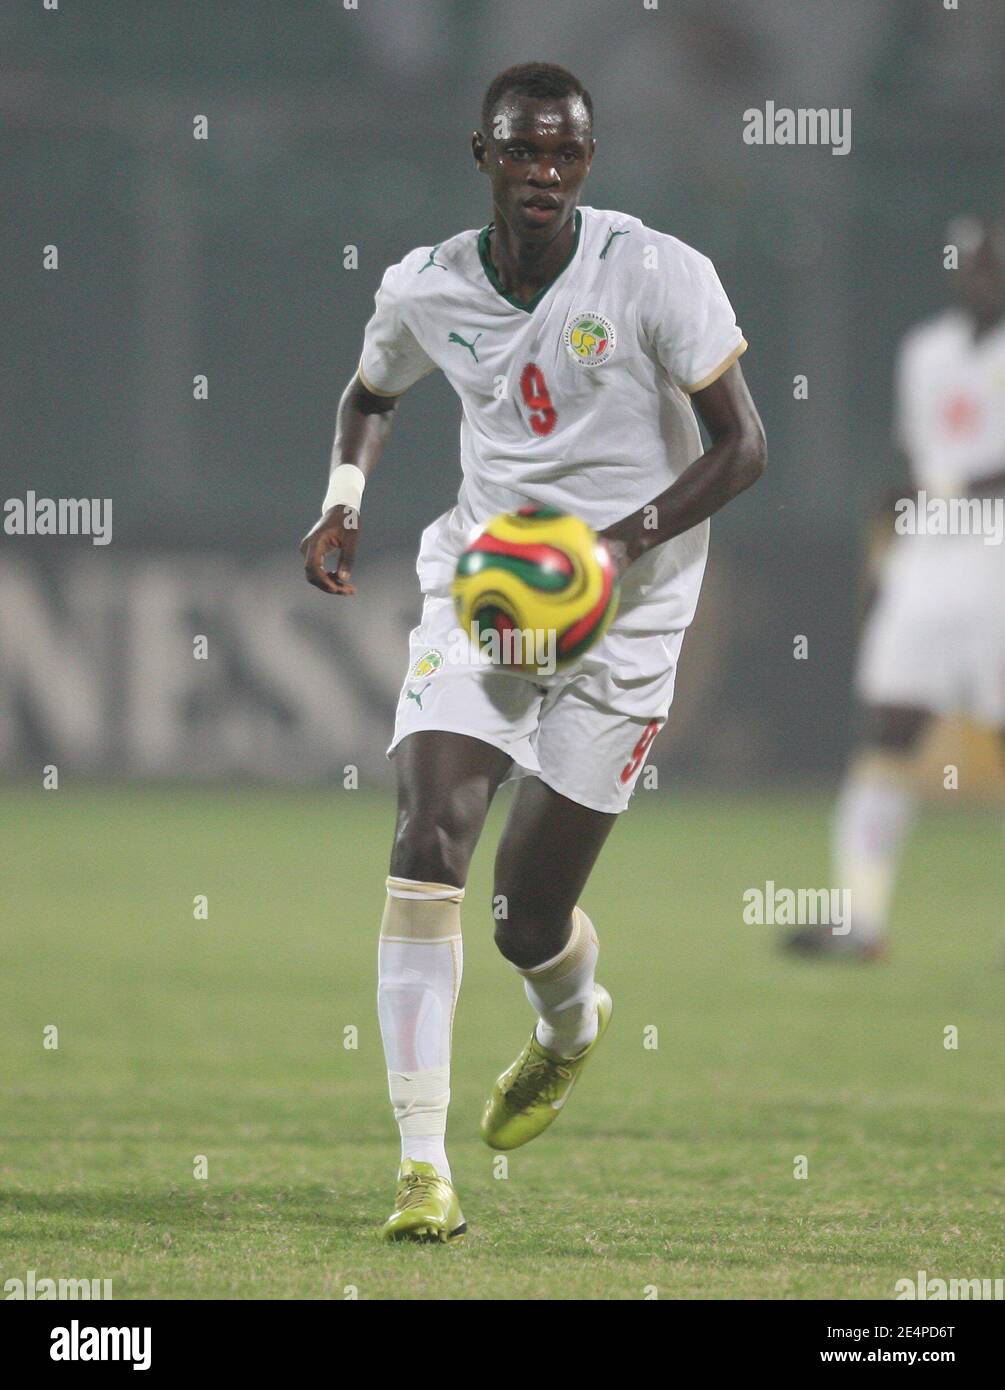 Senegal's Babacar MBaye Gueye during the African Cup of Nations soccer match, Senegal vs South Africa in Kumasi, Ghana on January 31, 2008. The match ended in a 1-1 draw. Senegal failed to qualify for the next round of the competition. Photo by Steeve McMay/Cameleon/ABACAPRESS.COM Stock Photo